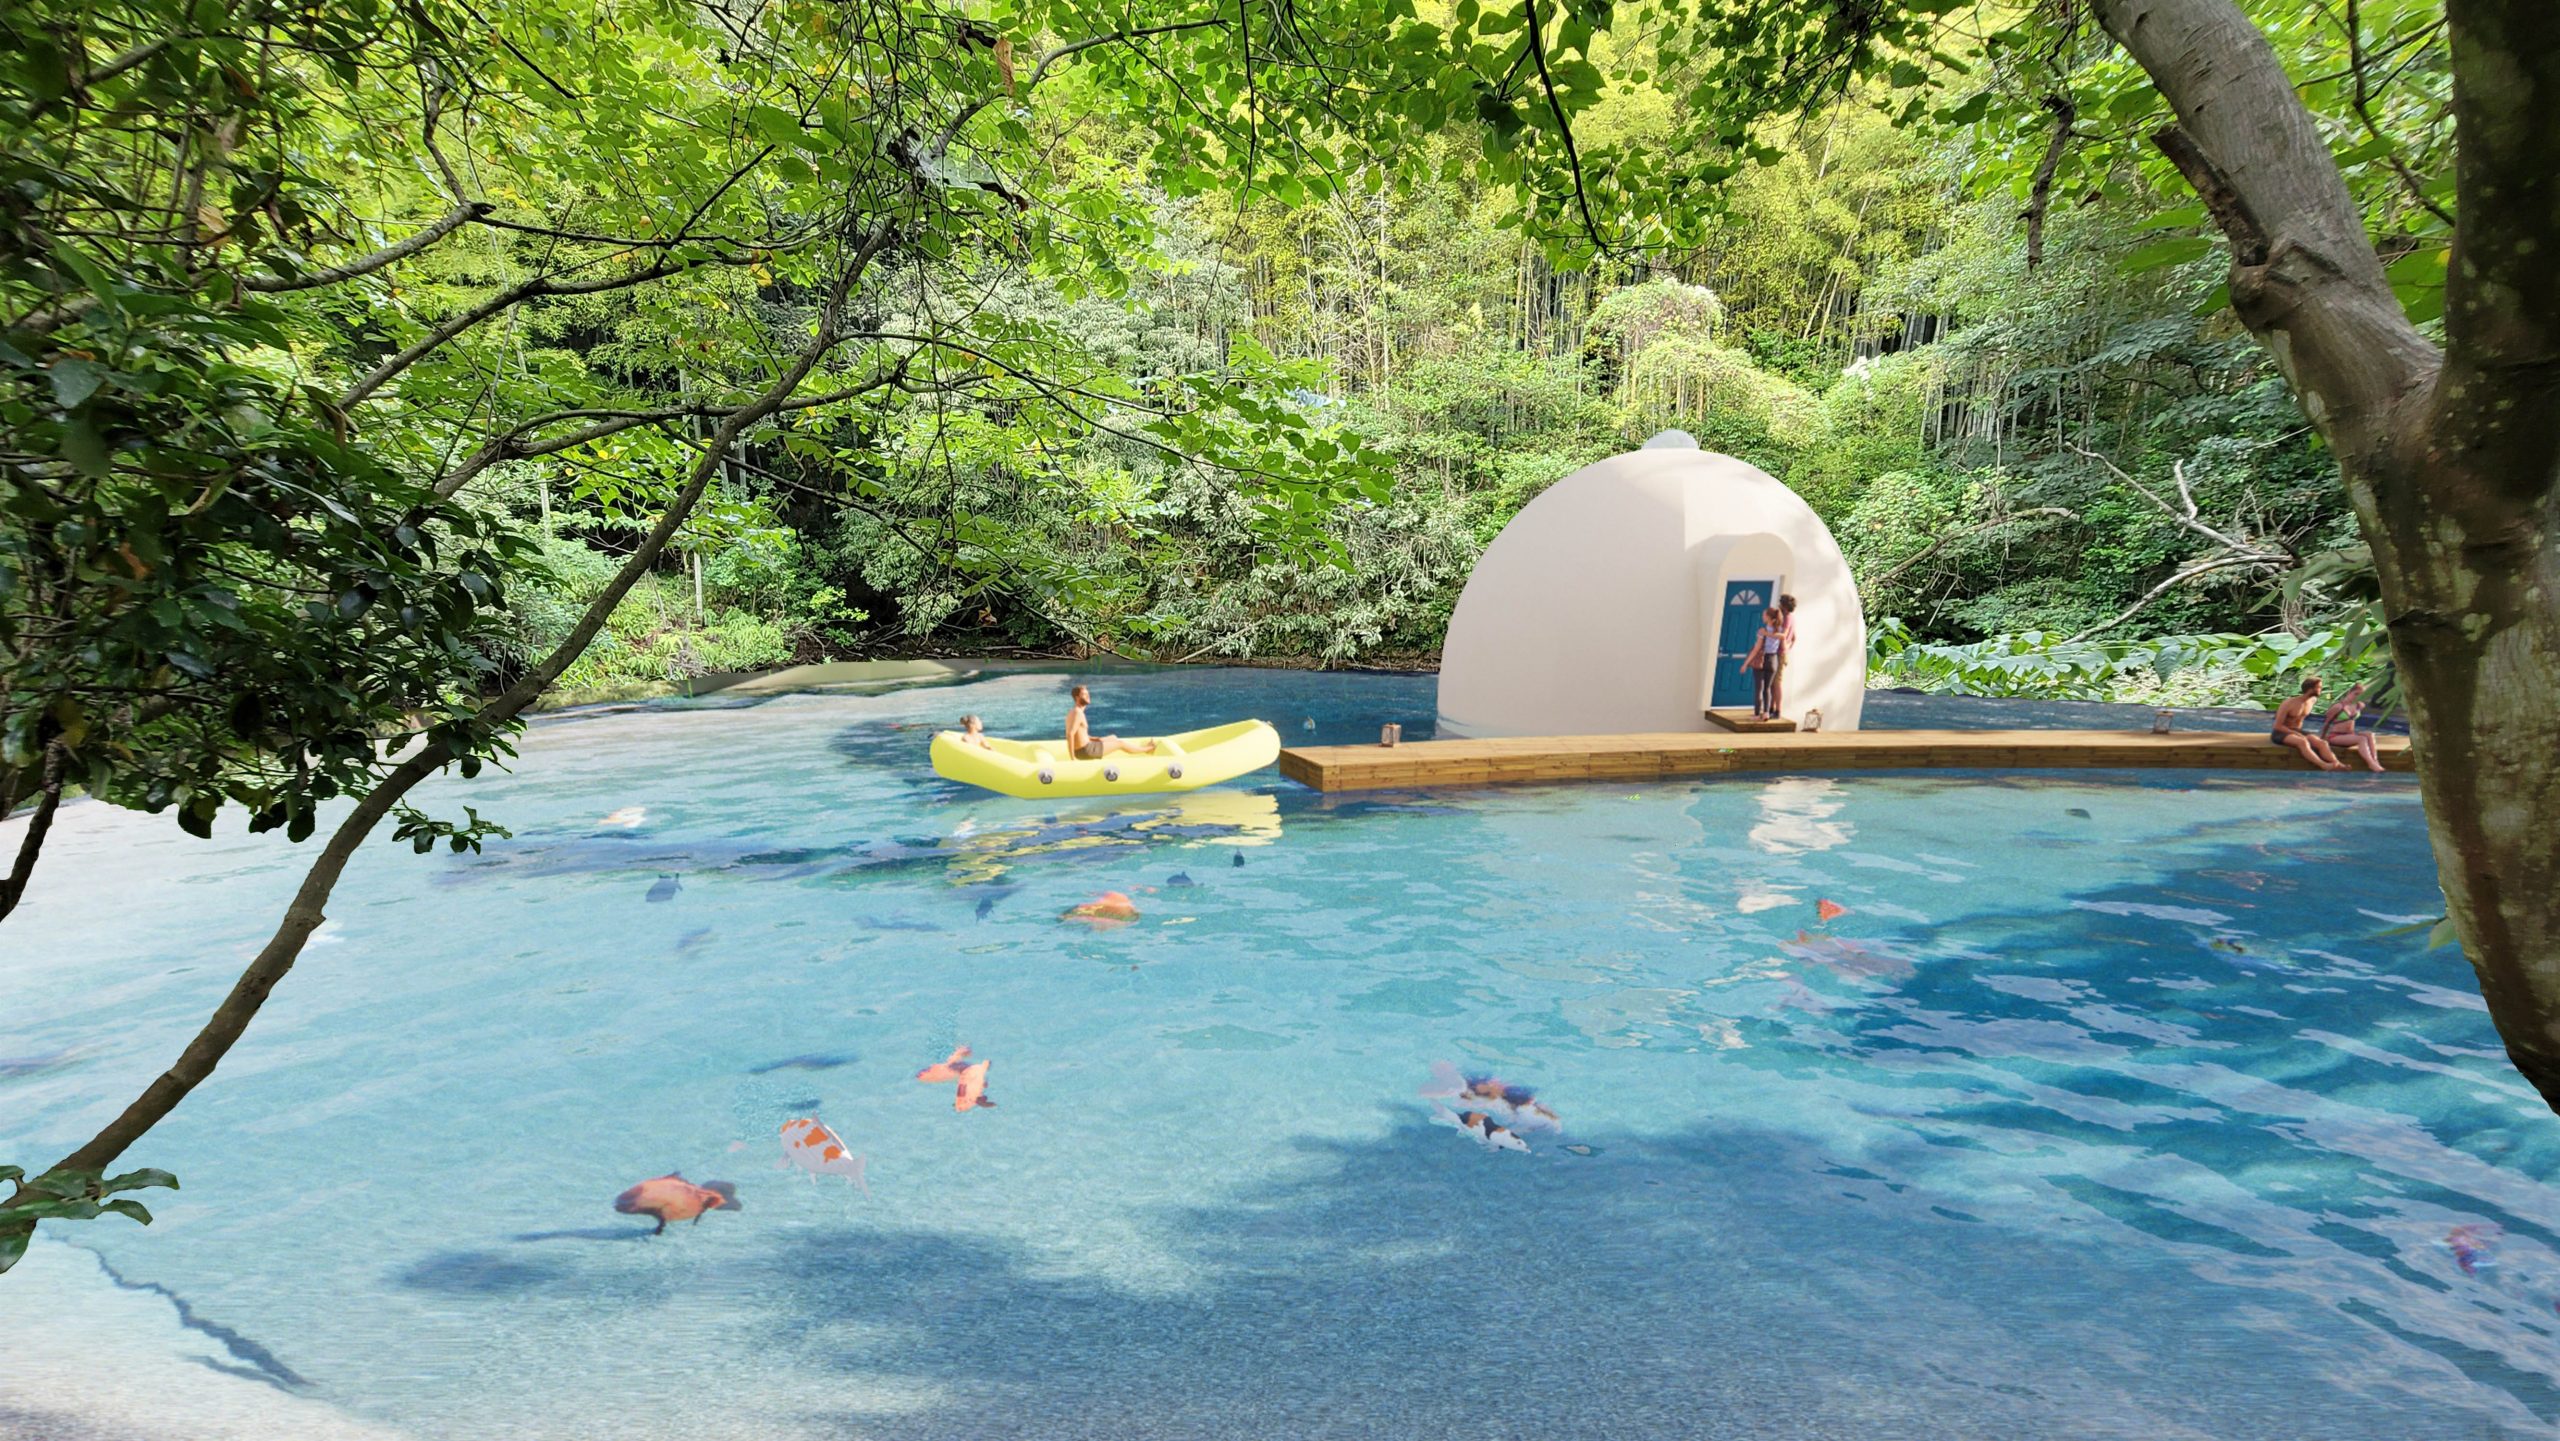 Dome-House Floating in a Koi Fish Pond by Iacopo T for Airbnb OMG! Fund